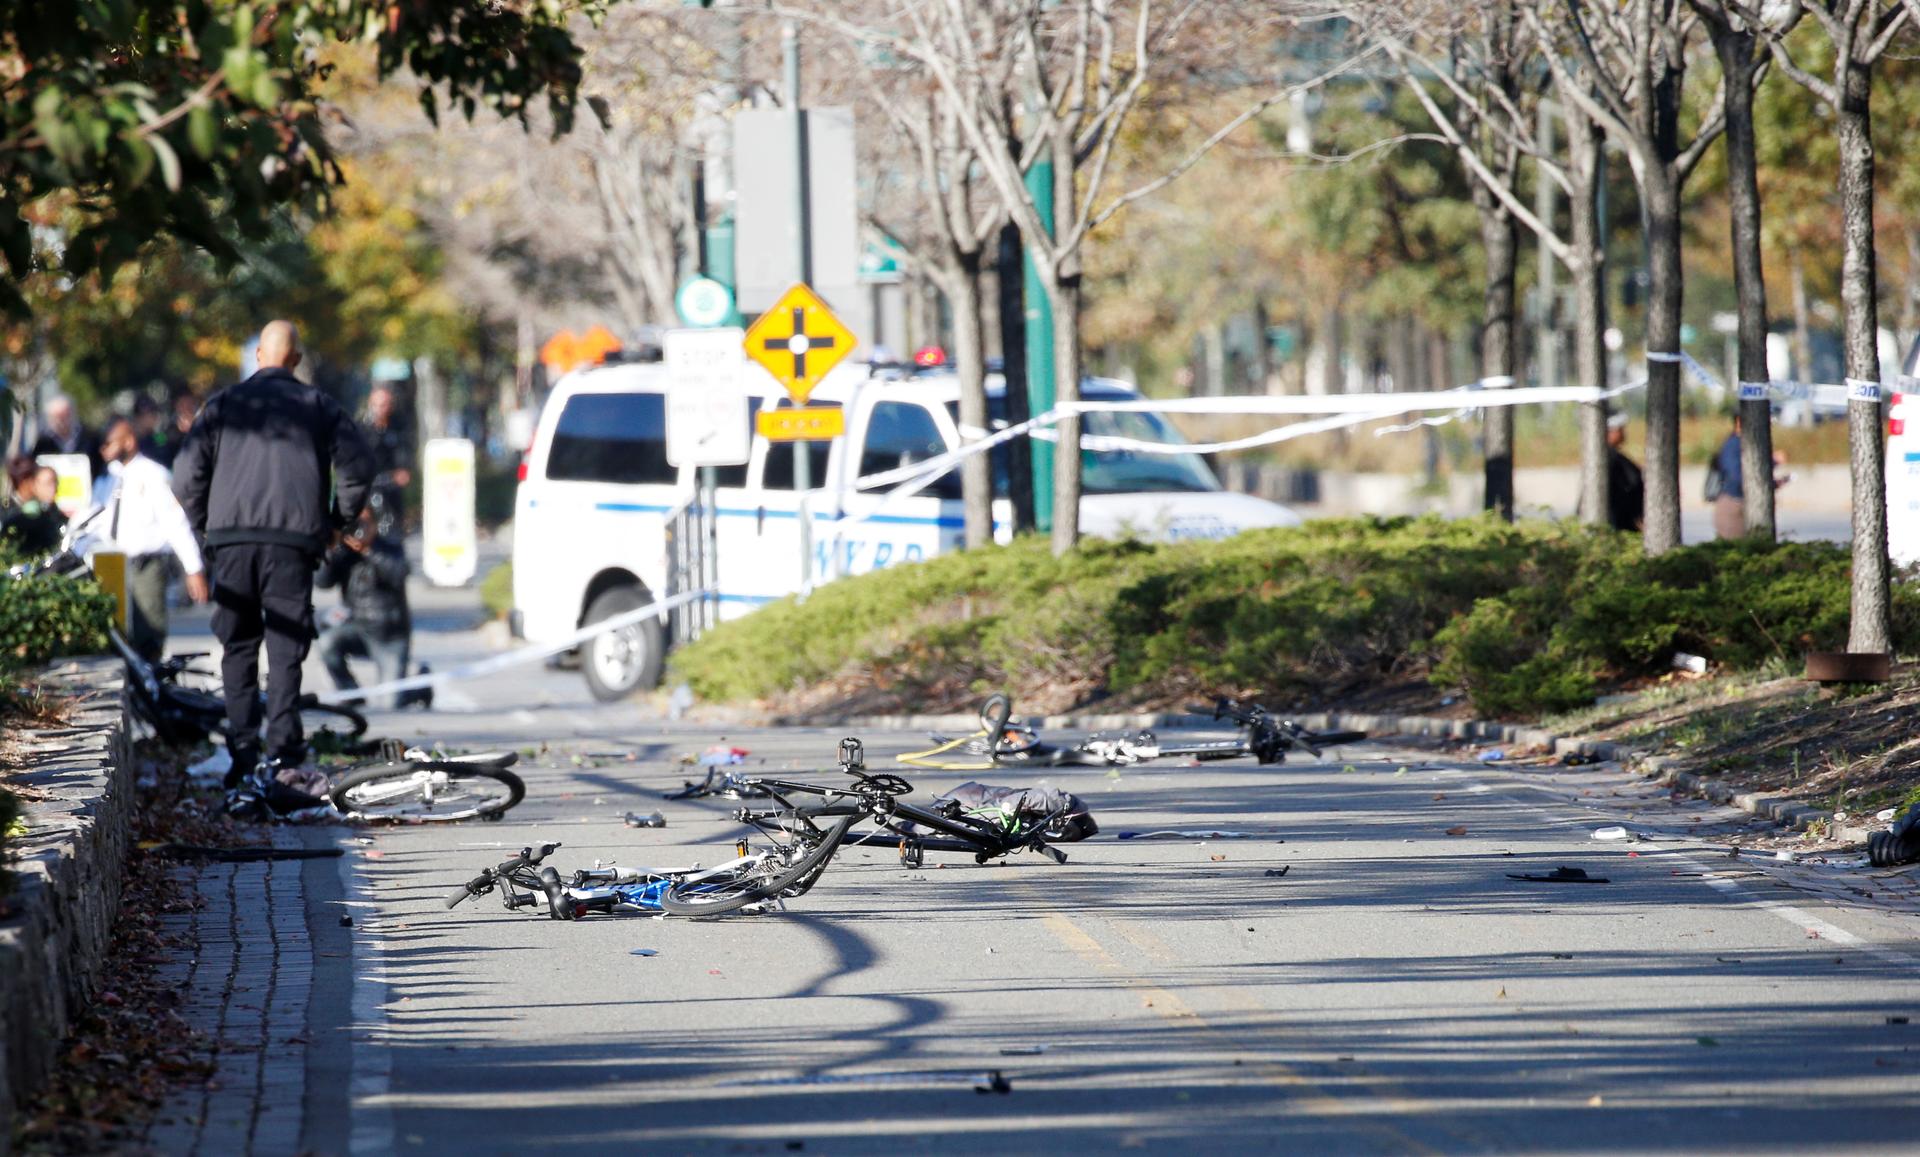 Multiple bikes are crushed along a bike path in lower Manhattan in New York.